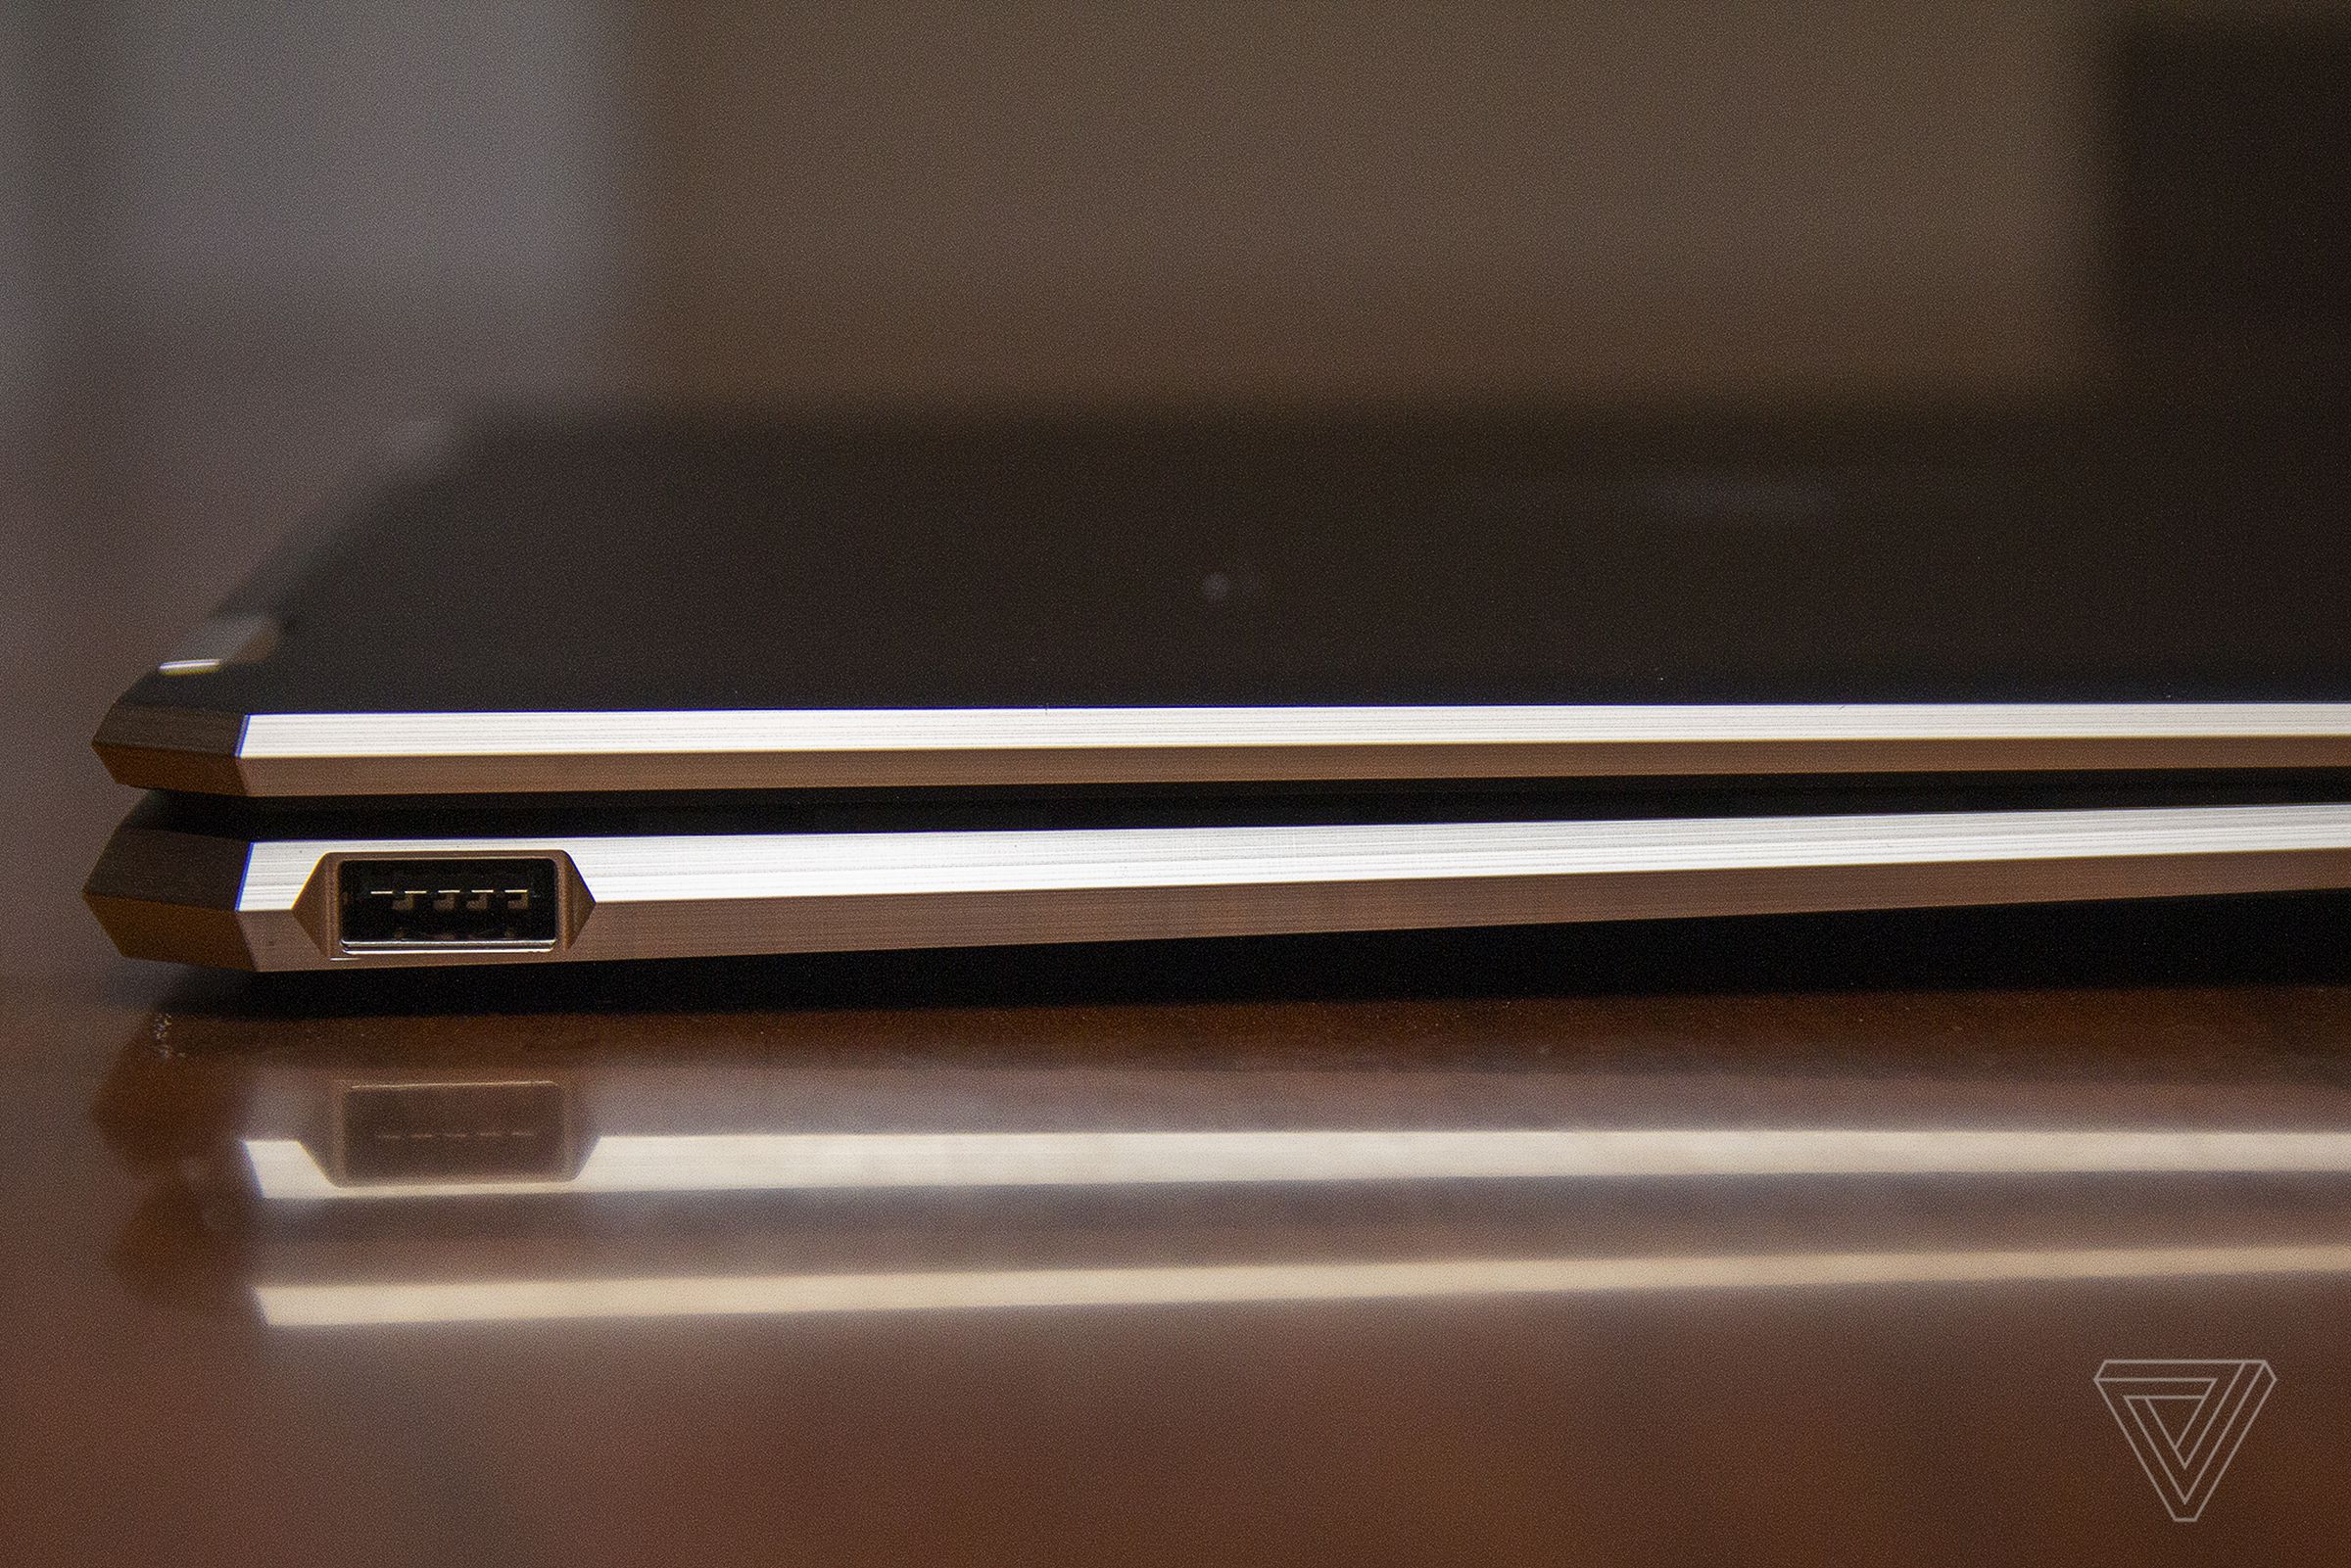 The back left corner of HP Spectre x360 14 up close.